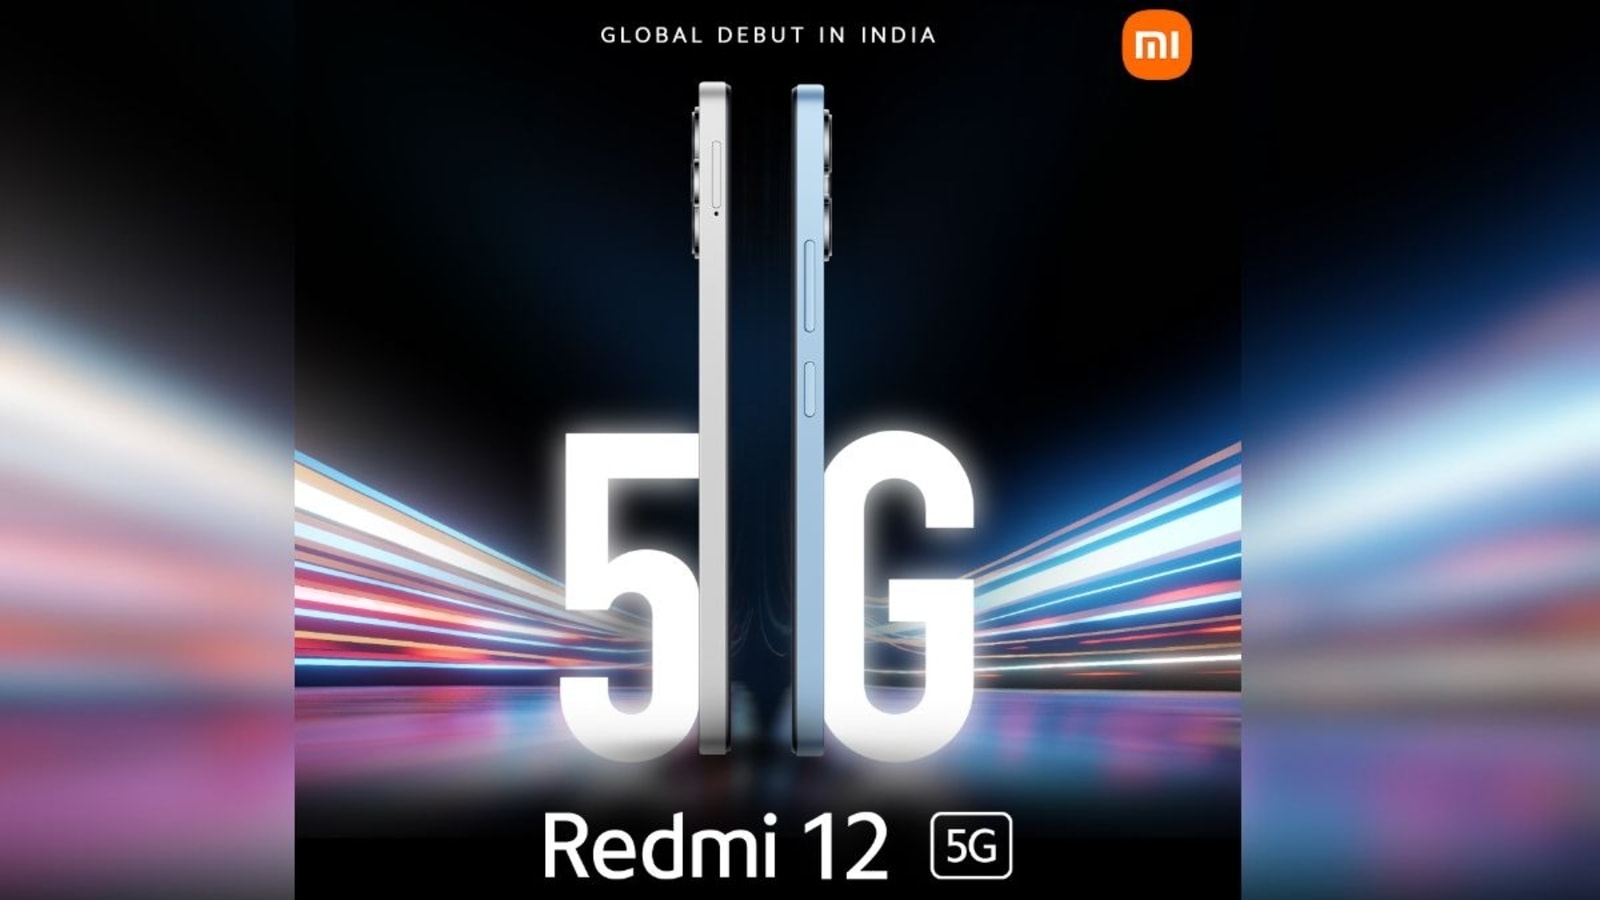 Xiaomi Redmi Watch 3 Active - Price in India, Specifications & Features